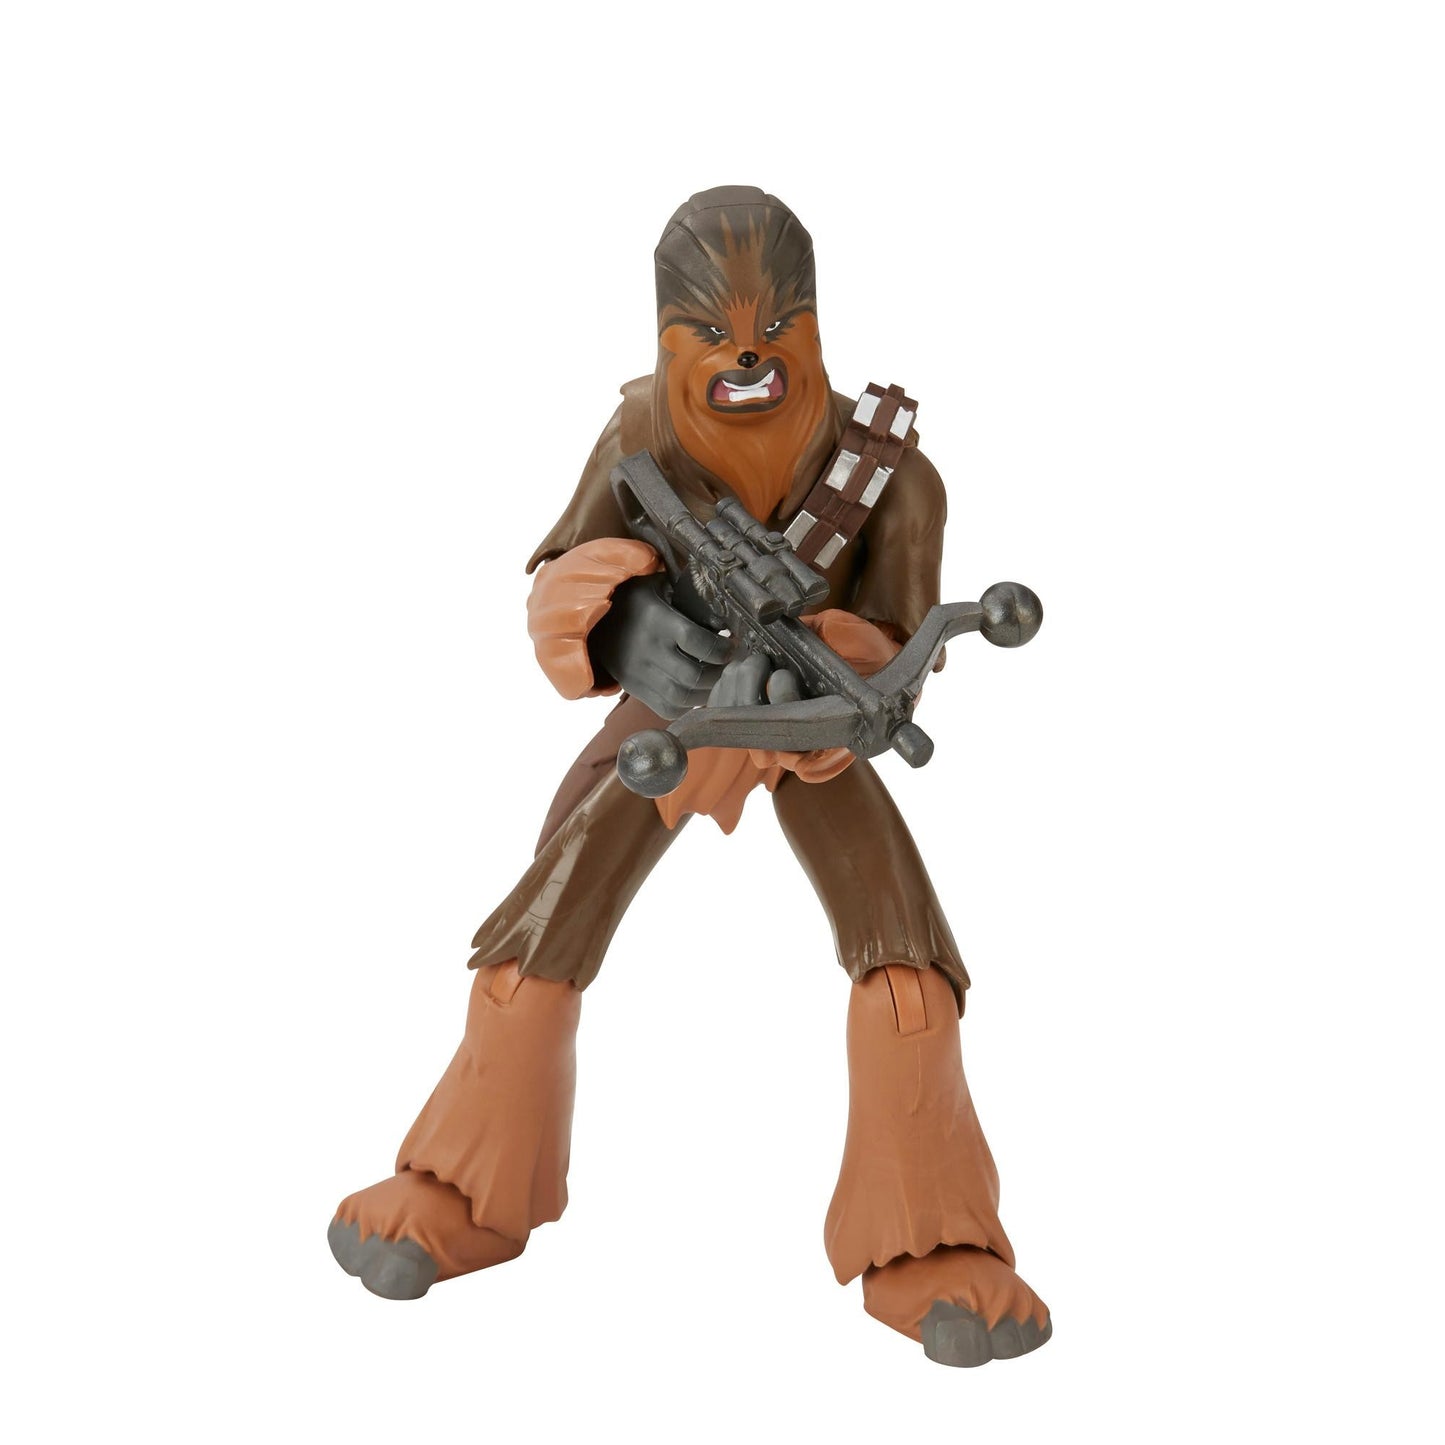 Star Wars Galaxy of Adventures Chewbacca 5-Inch-Scale Action Figure Toy